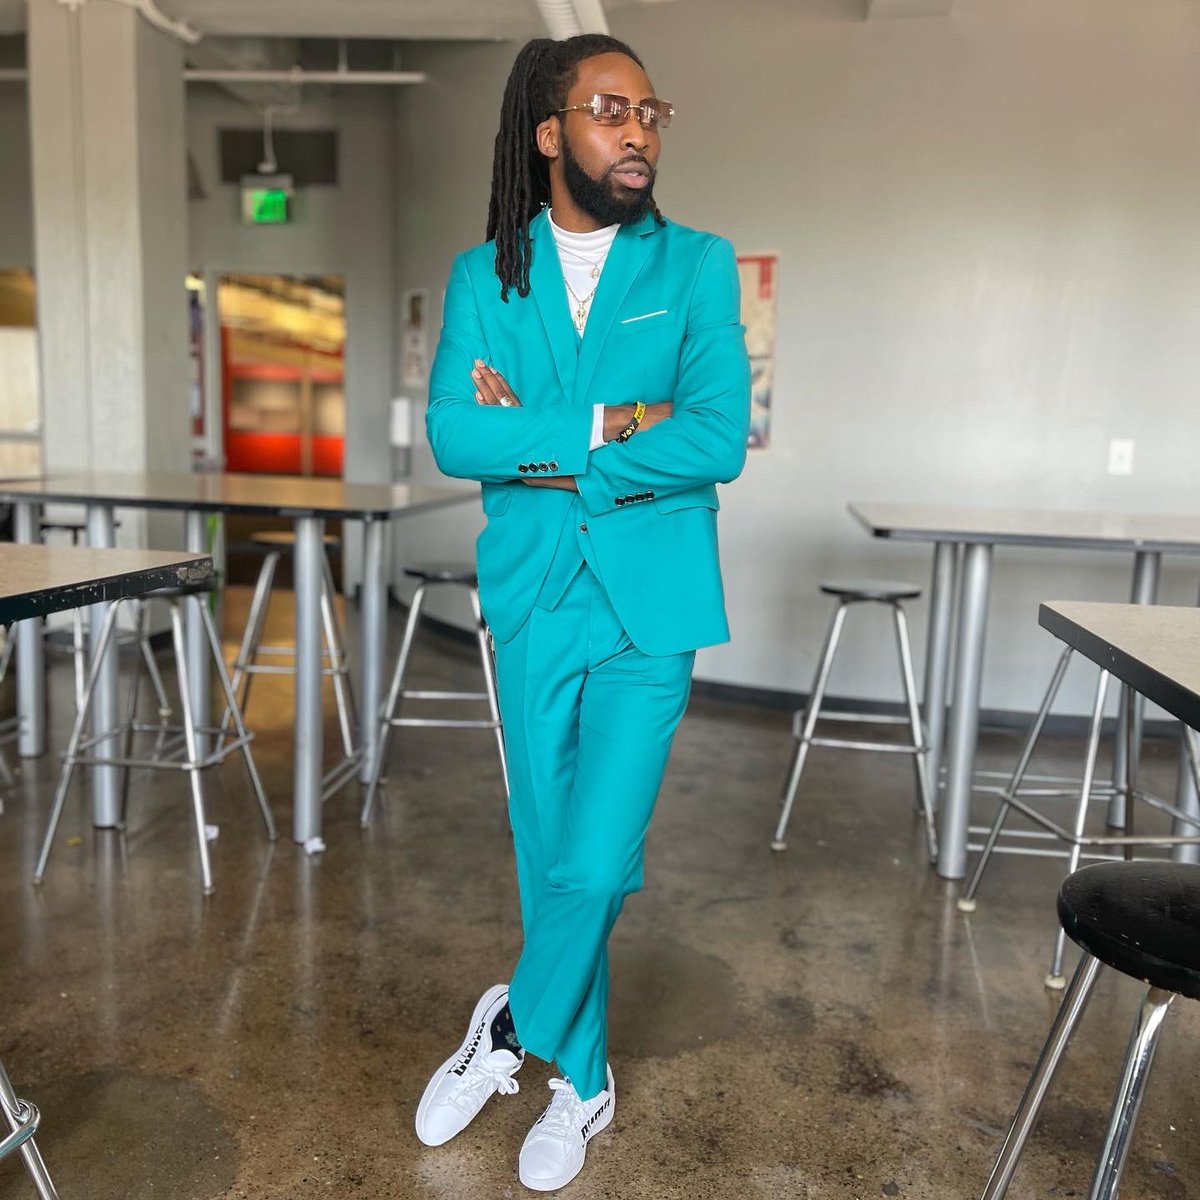 How you think I won best dressed with no support? 😎 #FirstDayBack #BlackMaleEducator